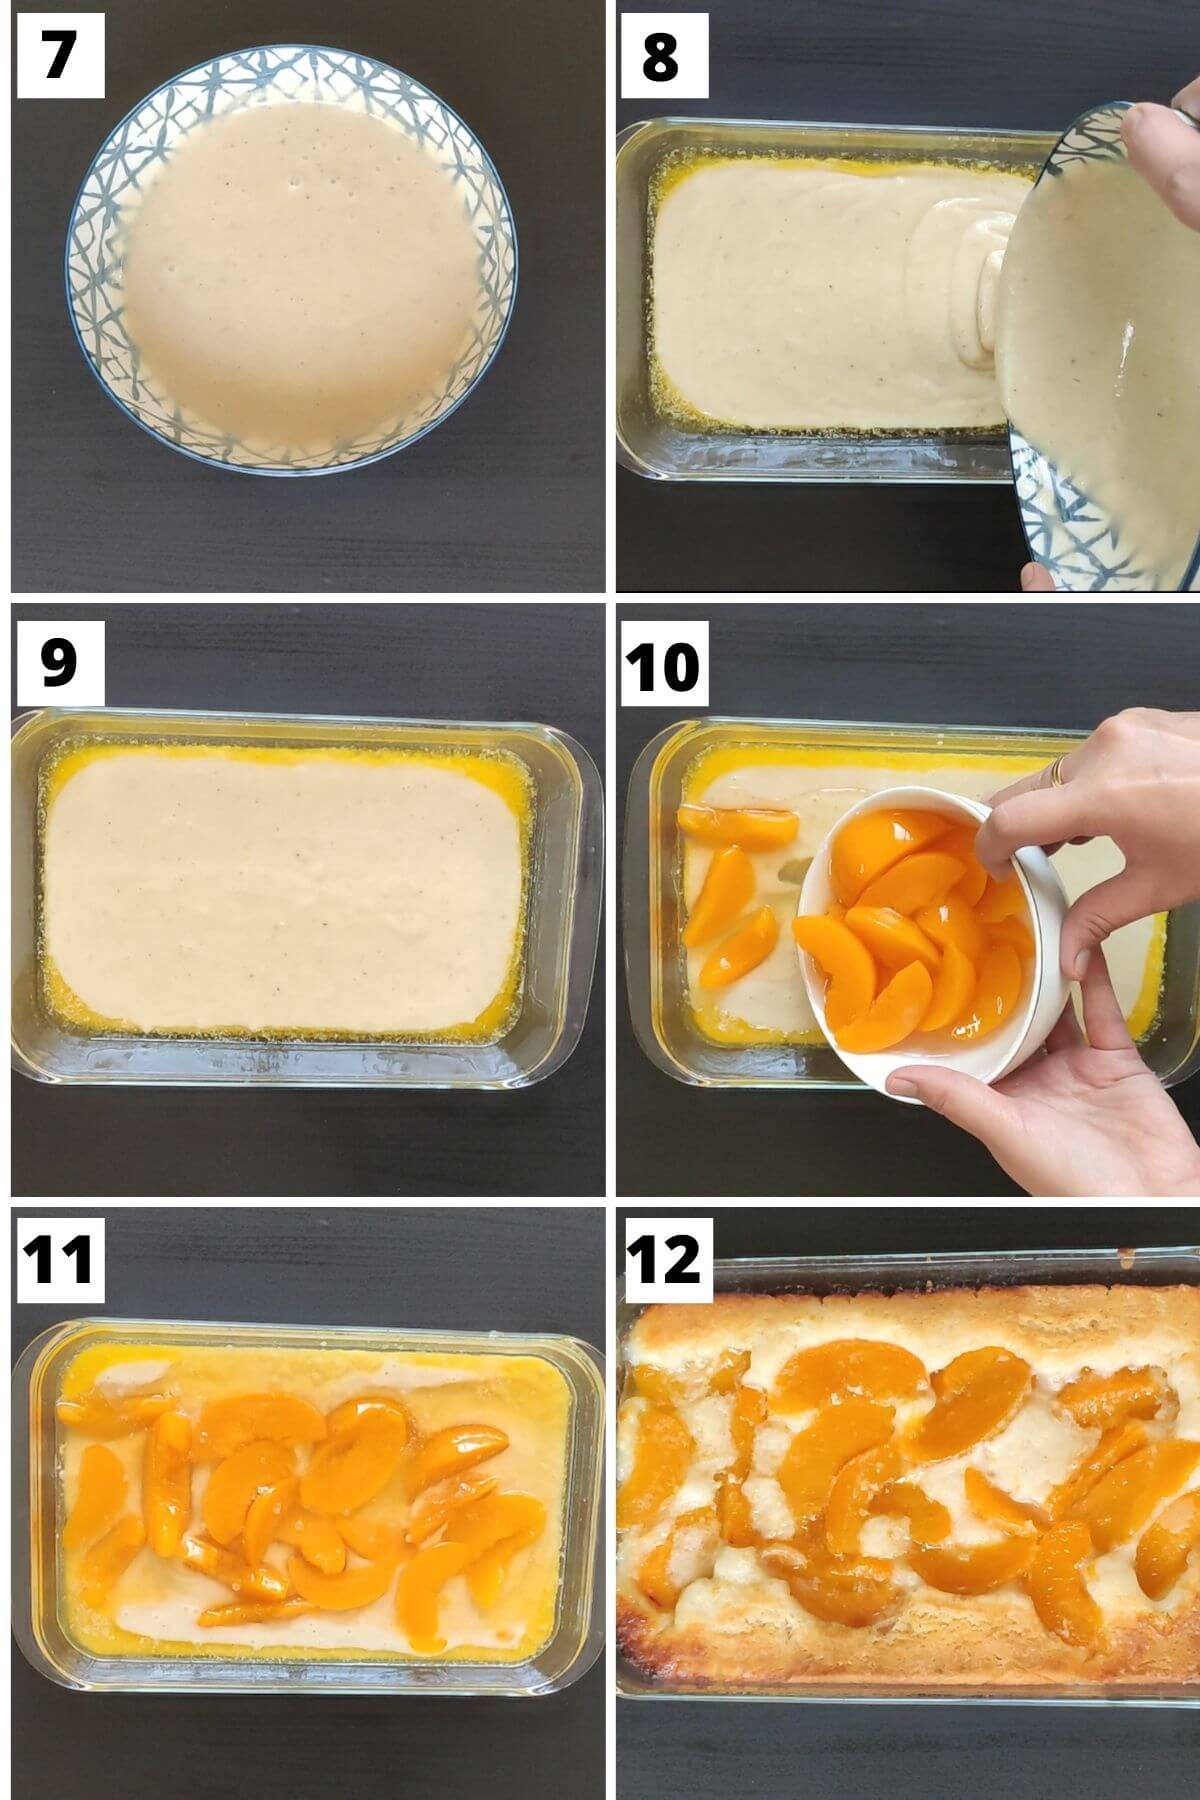 Steps to make peach cobbler with canned peaches